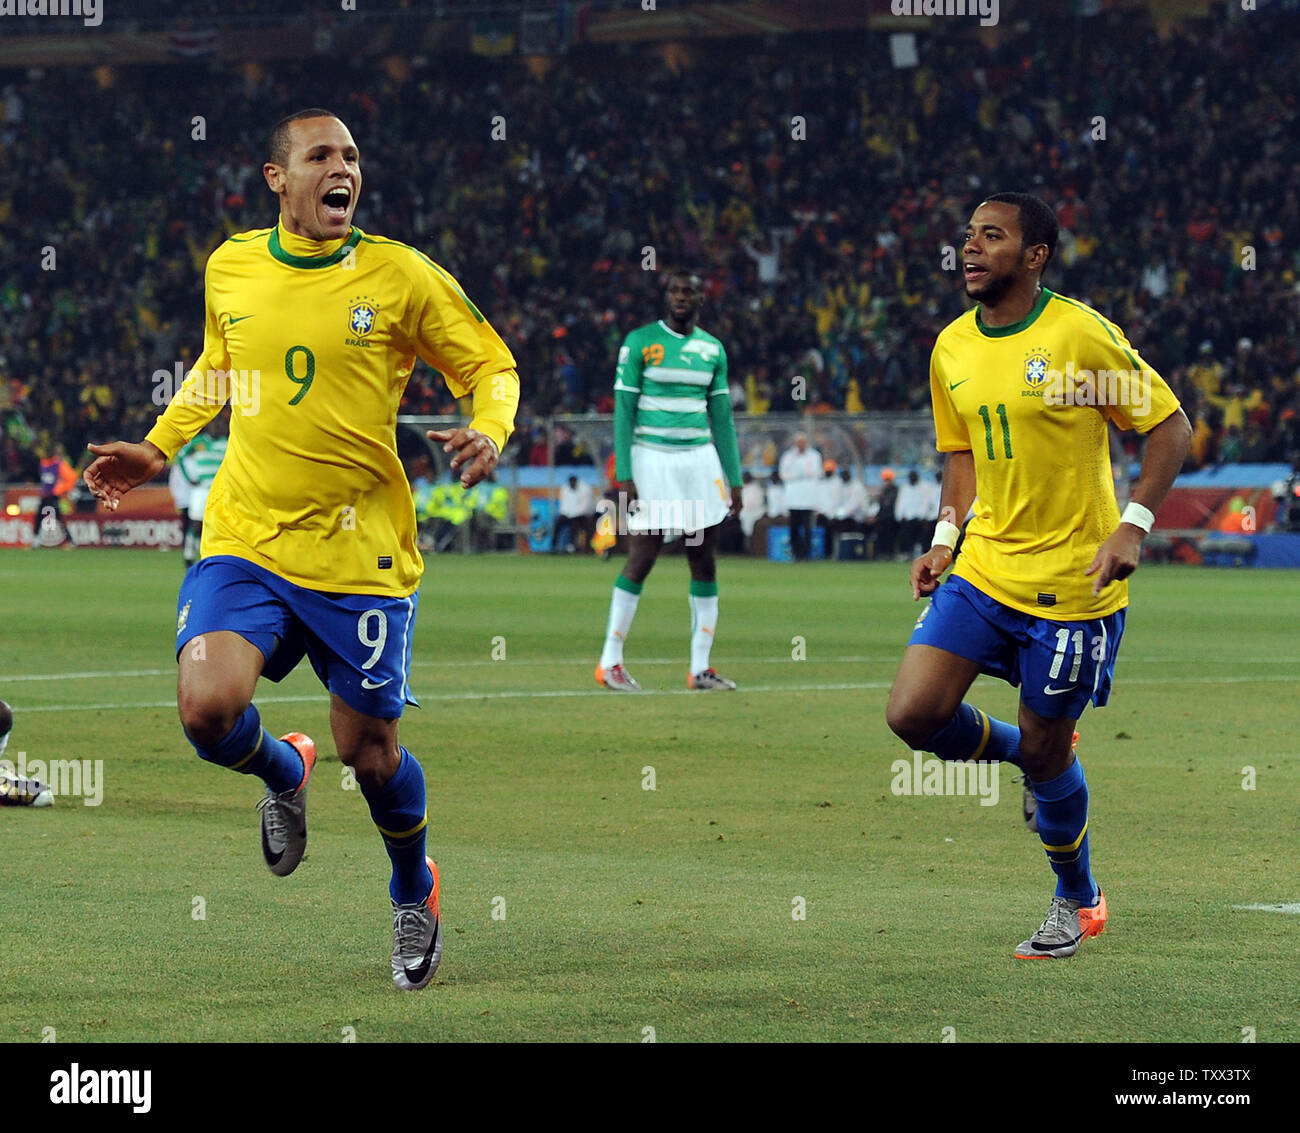 Luis Fabiano of Brazil celebrates scoring his side's second goal with team-mate Robinho during the Group G match at Soccer City Stadium in Johannesburg, South Africa on June 20, 2010. UPI/Chris Brunskill Stock Photo